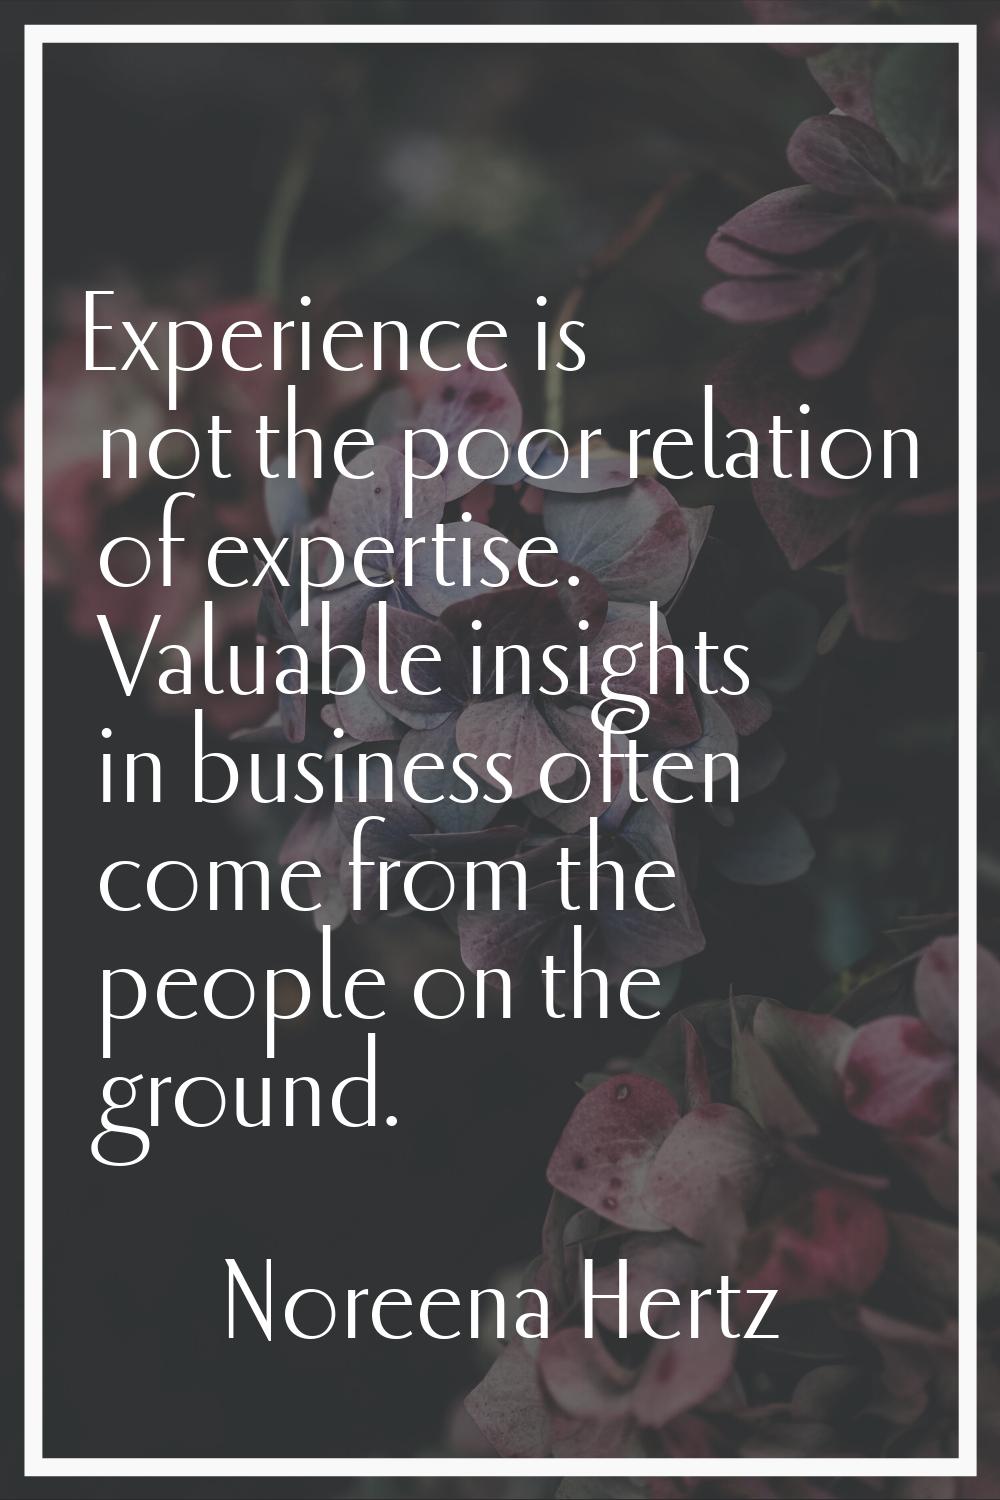 Experience is not the poor relation of expertise. Valuable insights in business often come from the